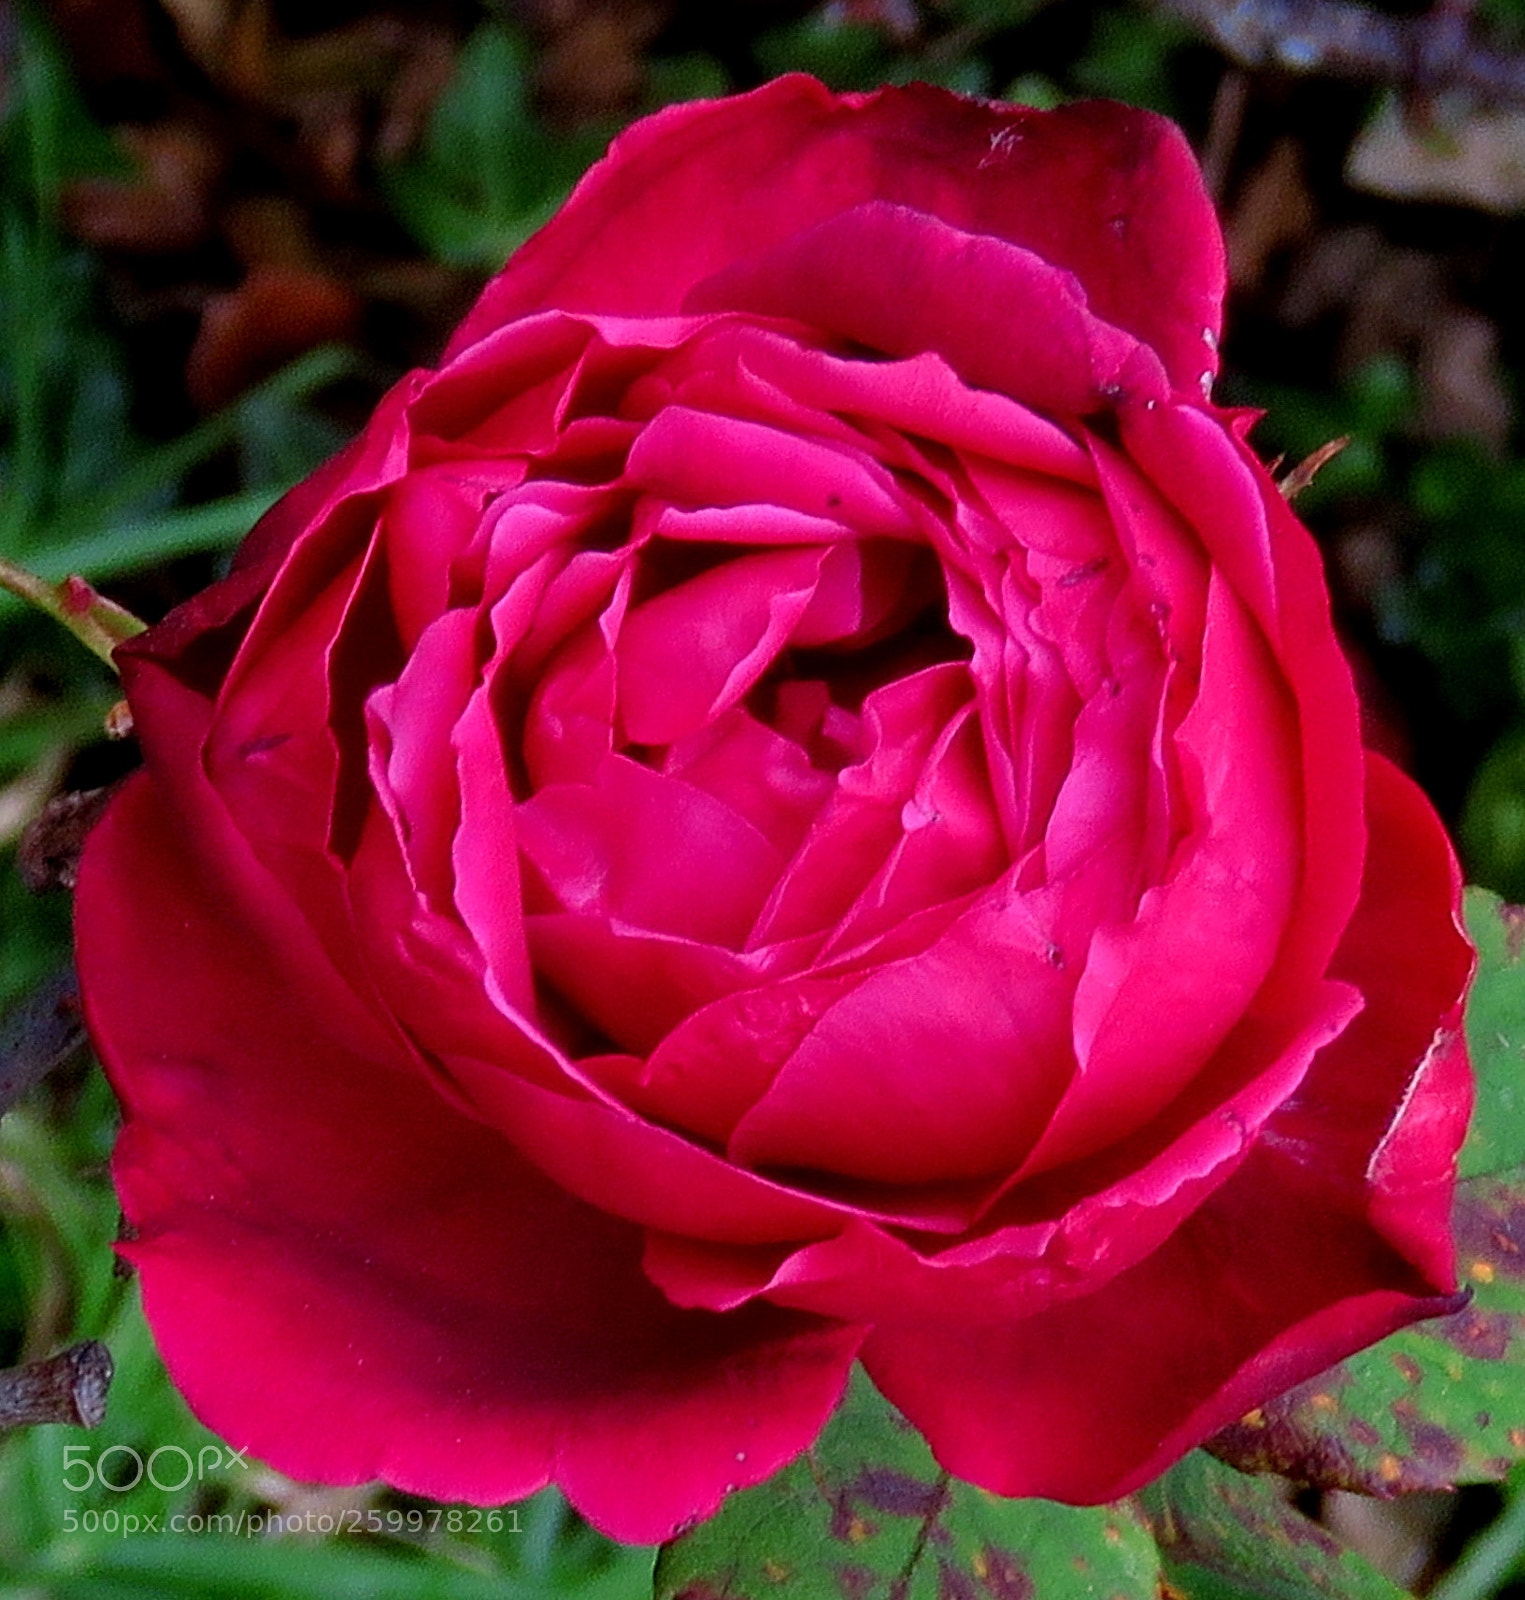 Canon PowerShot SX60 HS sample photo. A red rose in photography